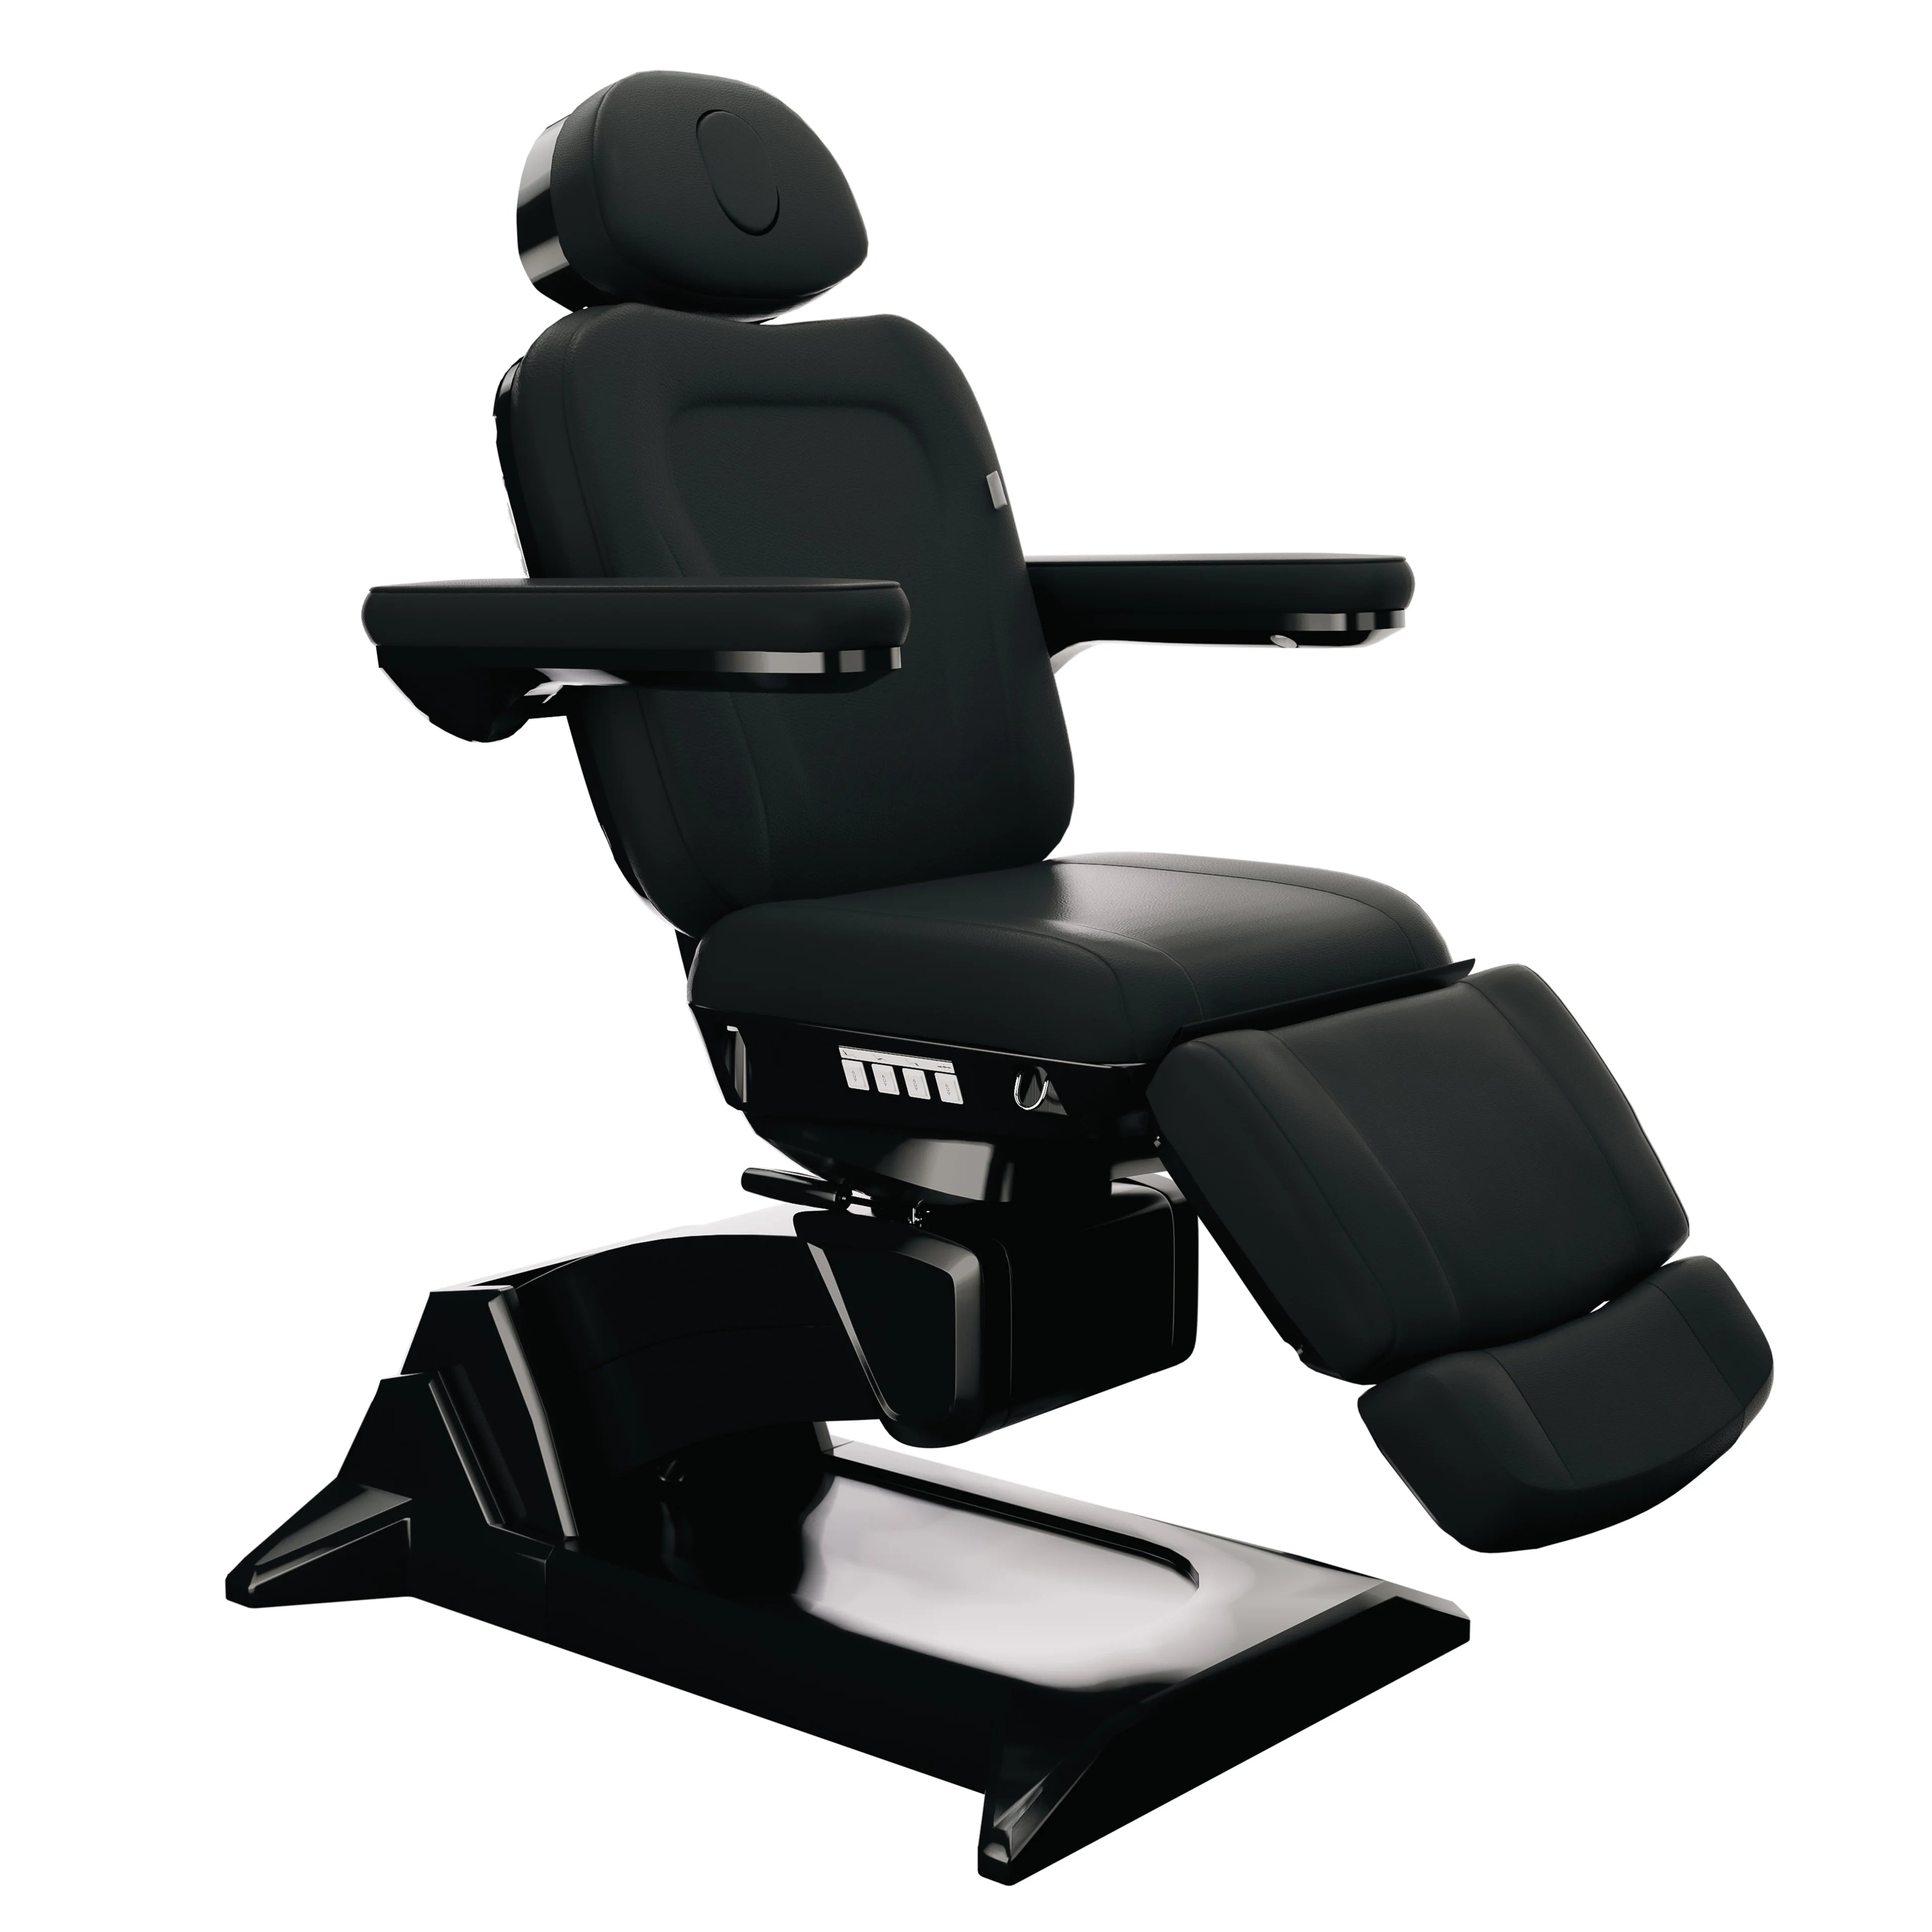 SpaMarc . Ultera (ALL Black) . Rotating . 4 Motor Spa Treatment Chair/Bed